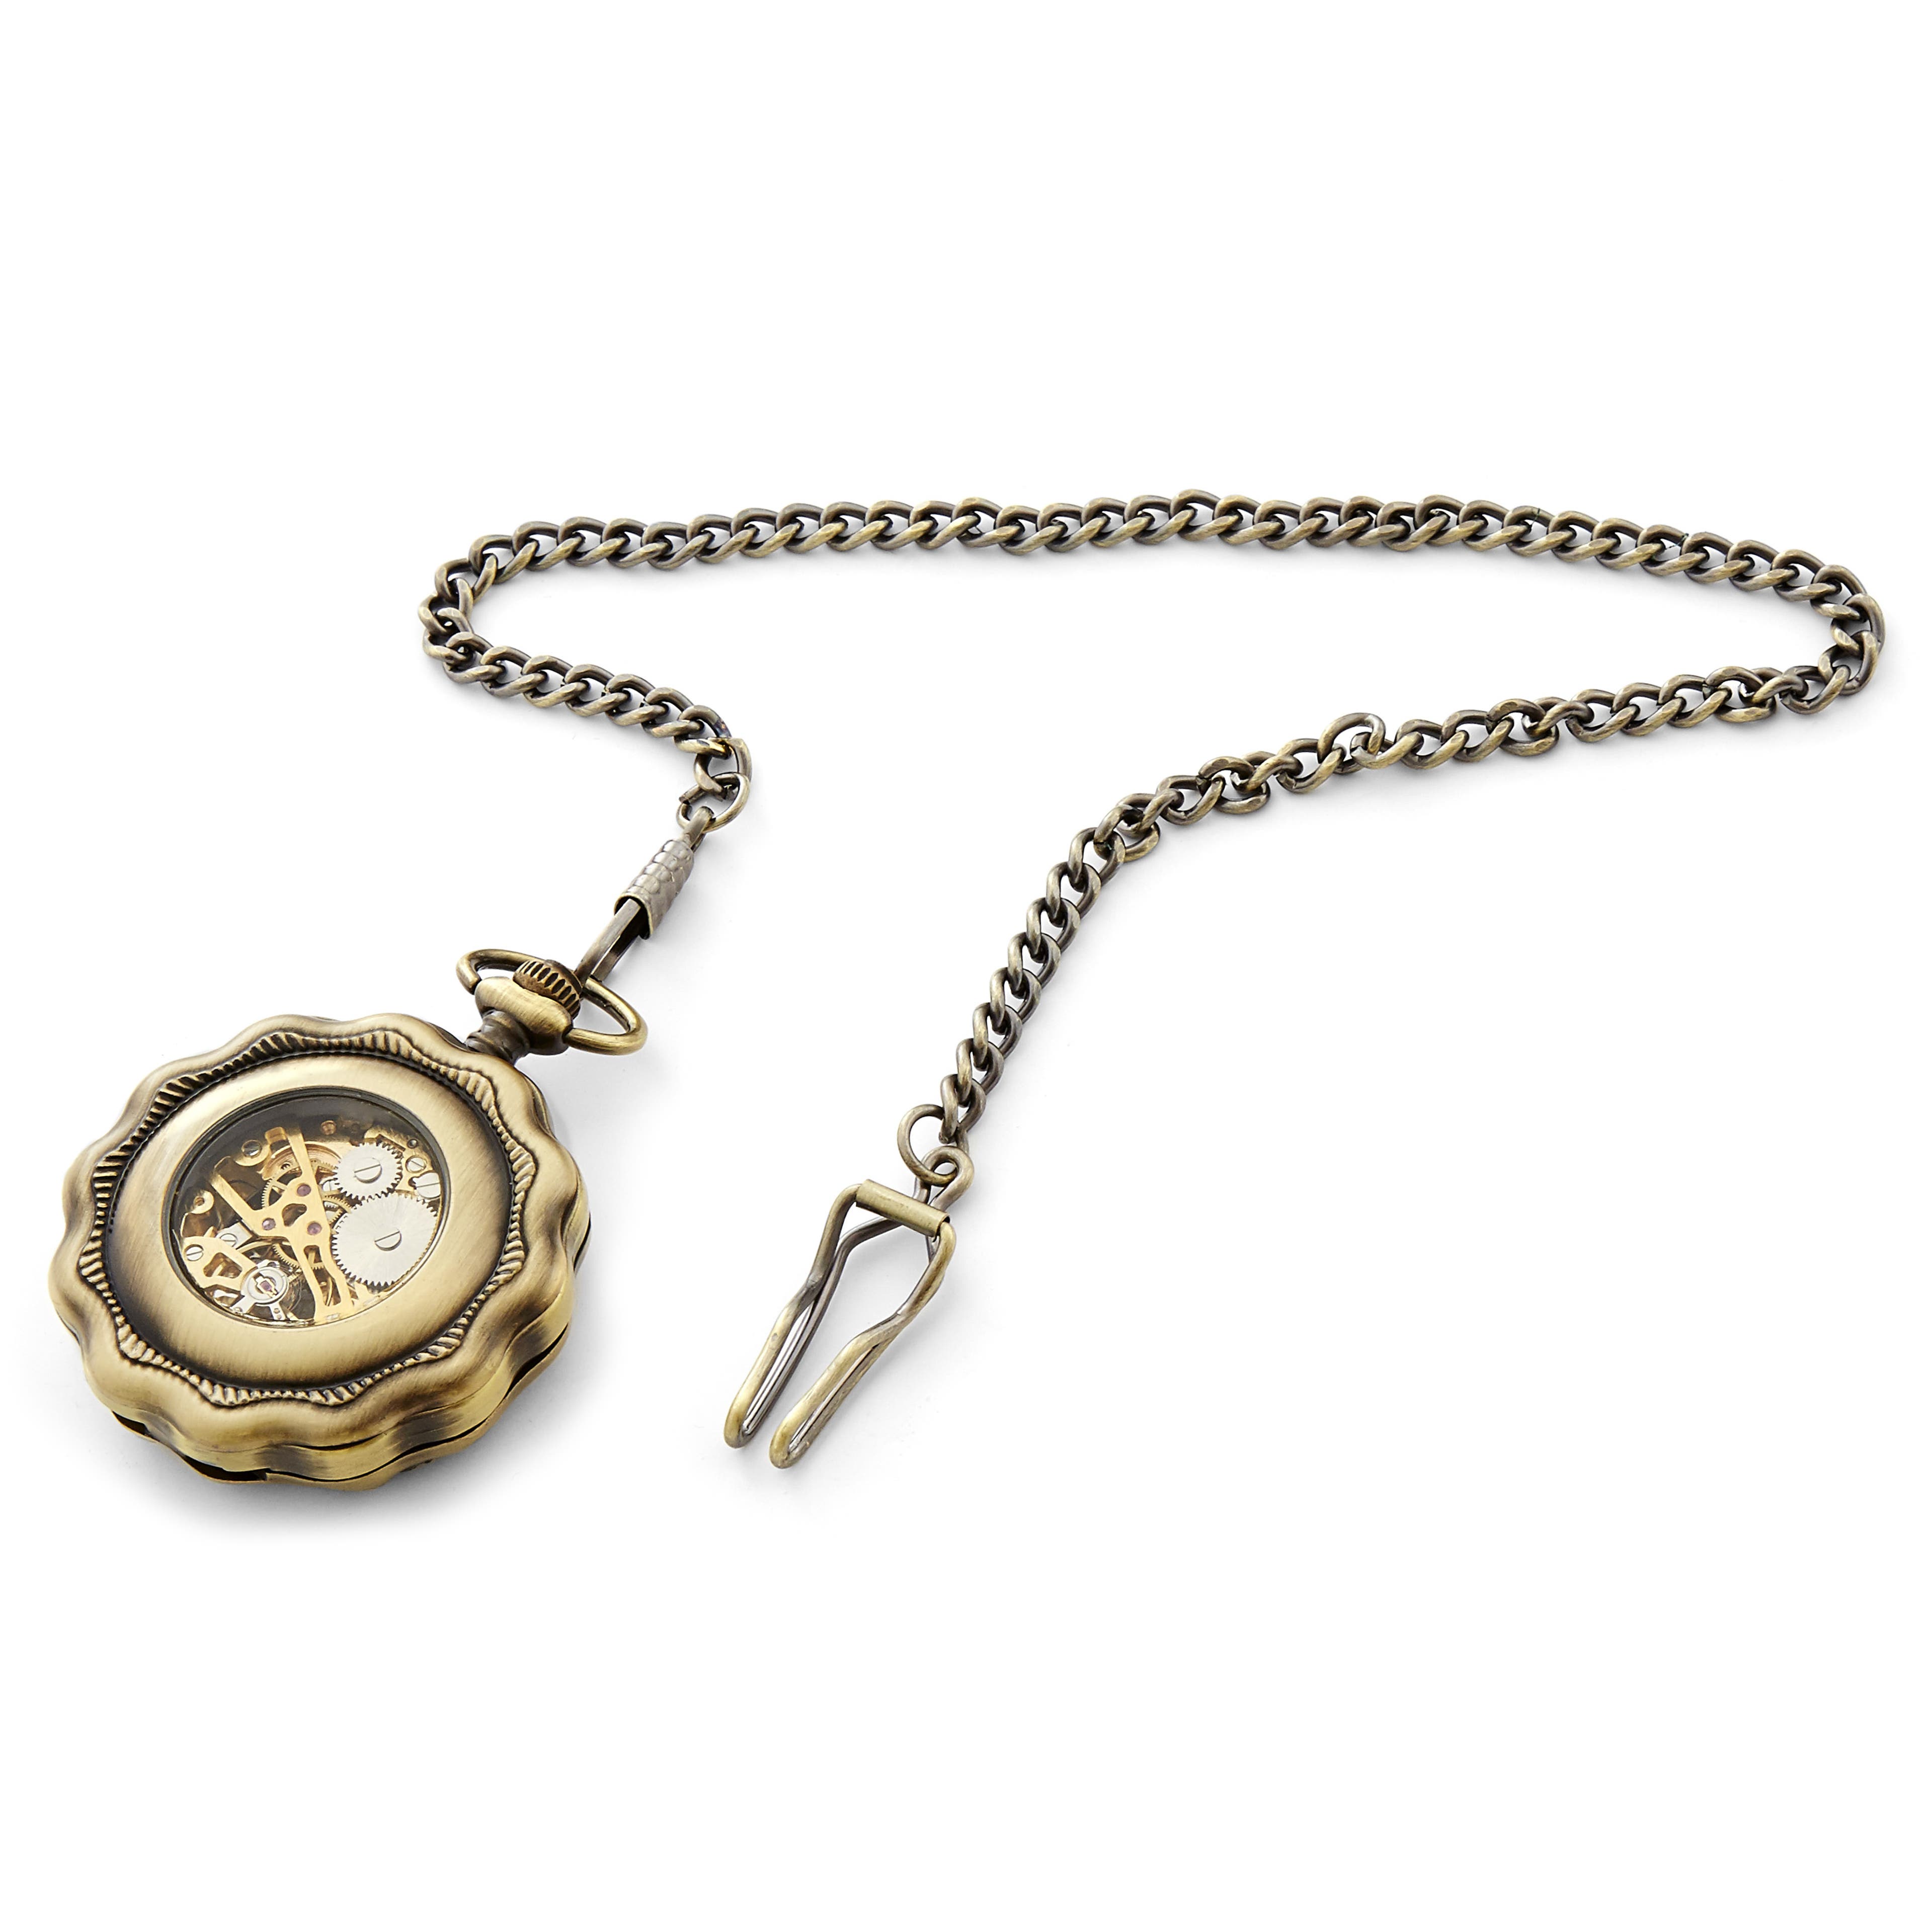 Gold-Tone Skeleton Pocket Watch With Curved Edge, Gold-Tone Movement & Gold-Tone Cable Chain